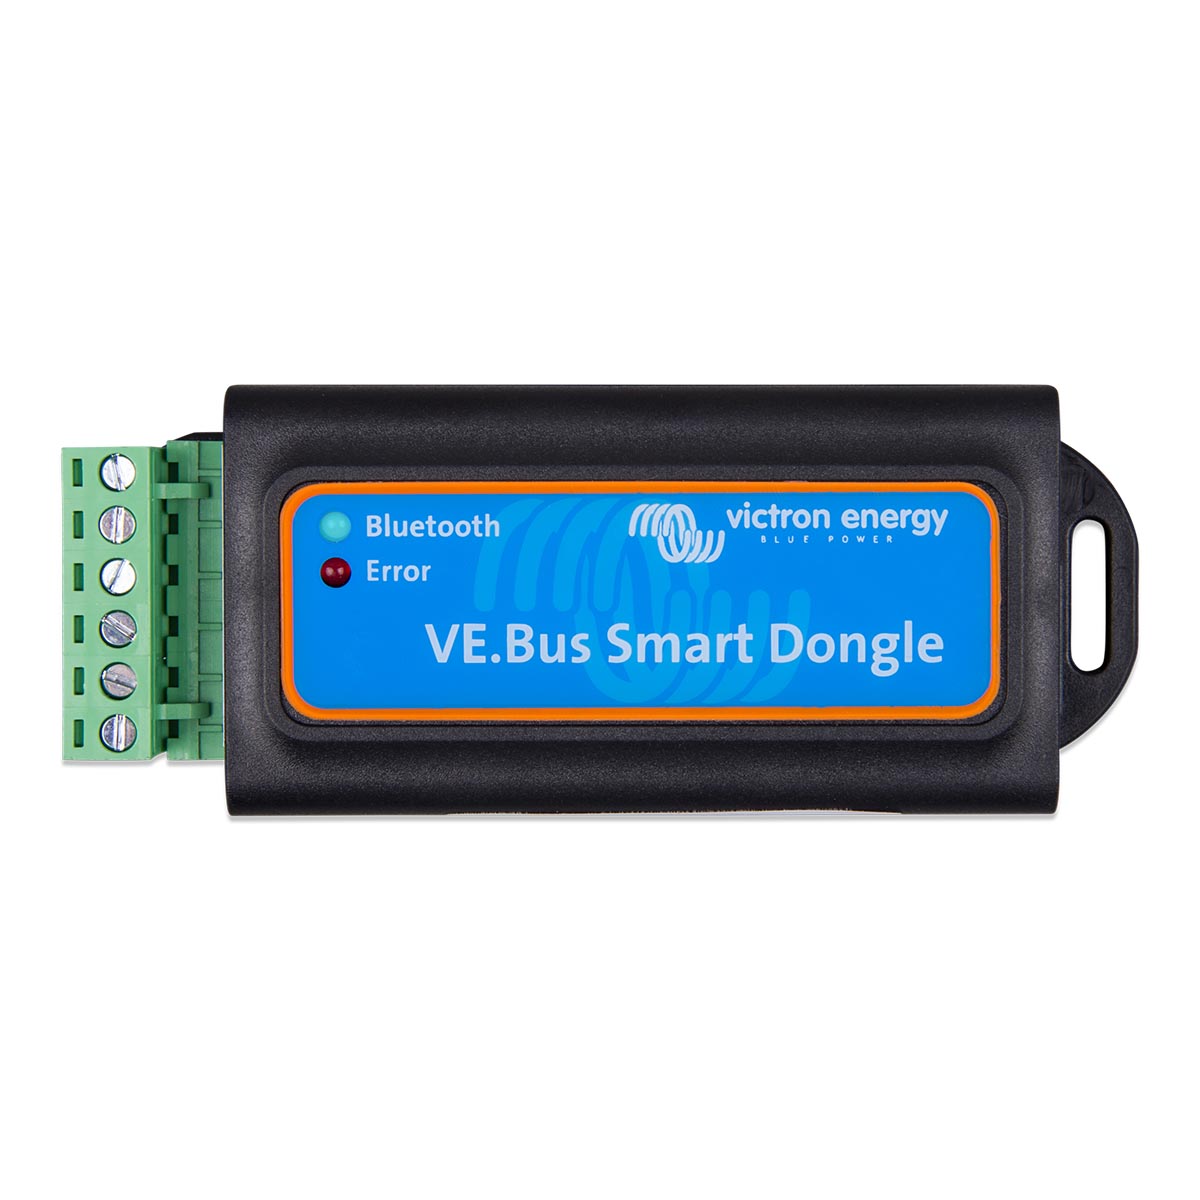 Victron VE.Bus Smart dongle (USt-befreit nach §12 Abs.3 Nr. 1 S.1 UStG)